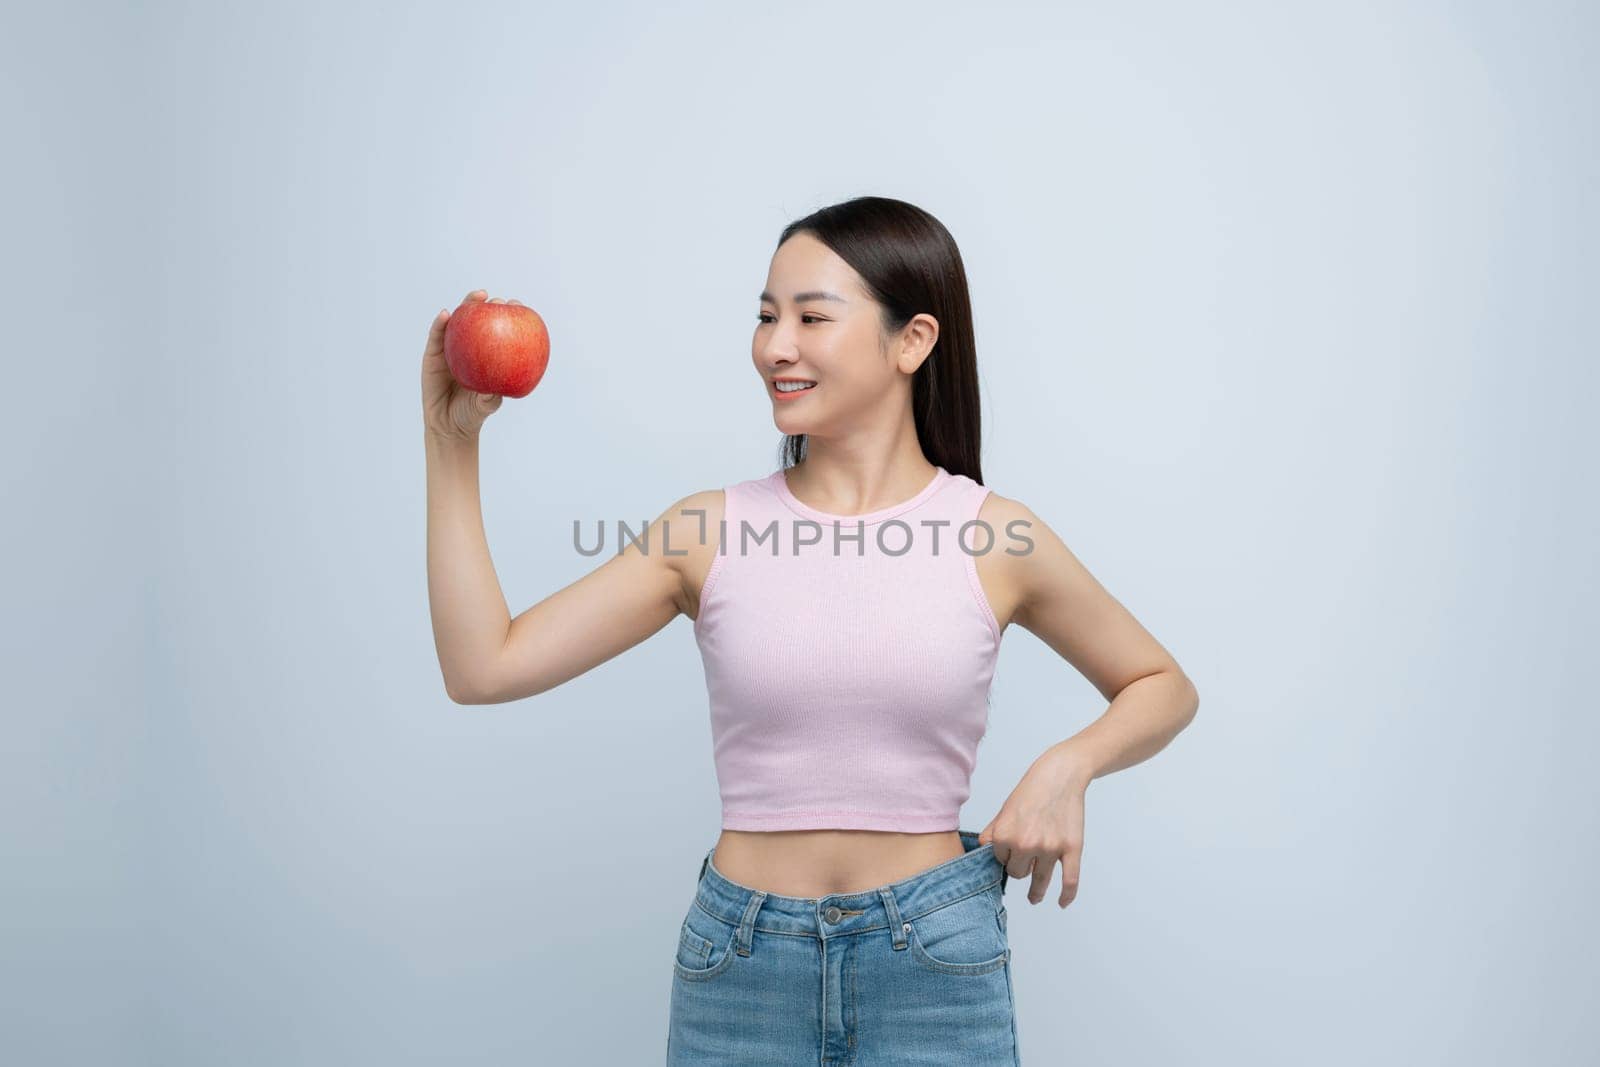 pretty girl in jeans are big, holds an apple in her hand.